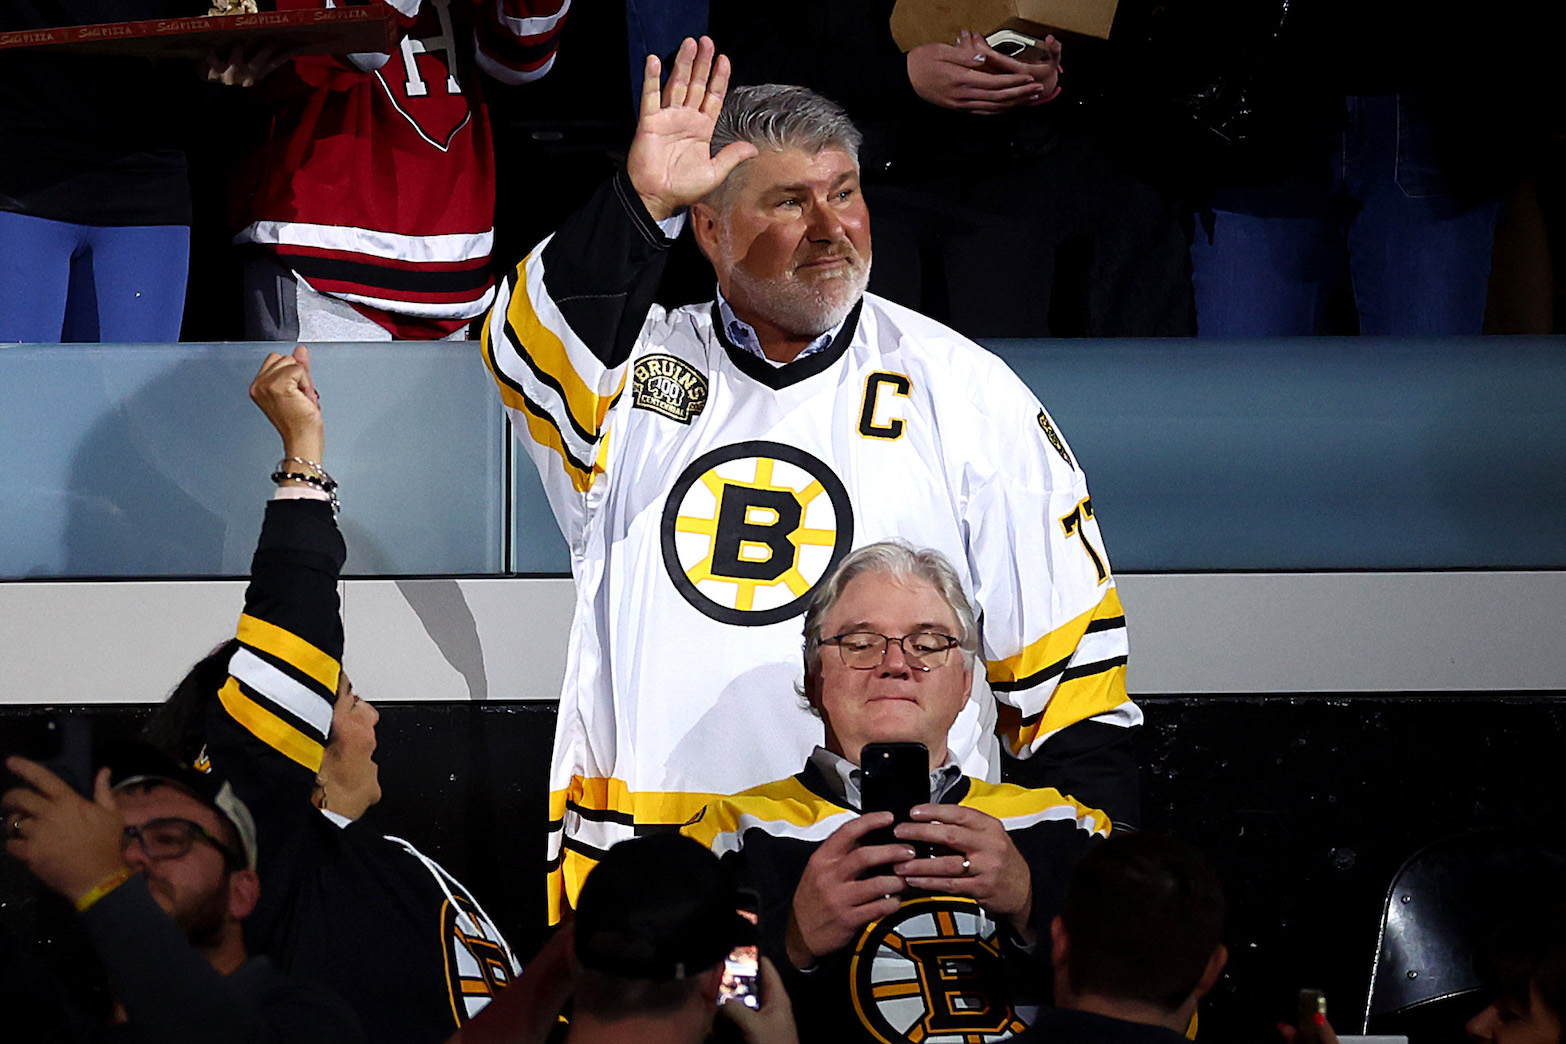 BOSTON, MASSACHUSETTS - OCTOBER 11: Former Boston Bruins player Ray Bourque waves to fans before the Bruins home opener against the Chicago Blackhawks at TD Garden on October 11, 2023 in Boston, Massachusetts. (Photo by Maddie Meyer/Getty Images)